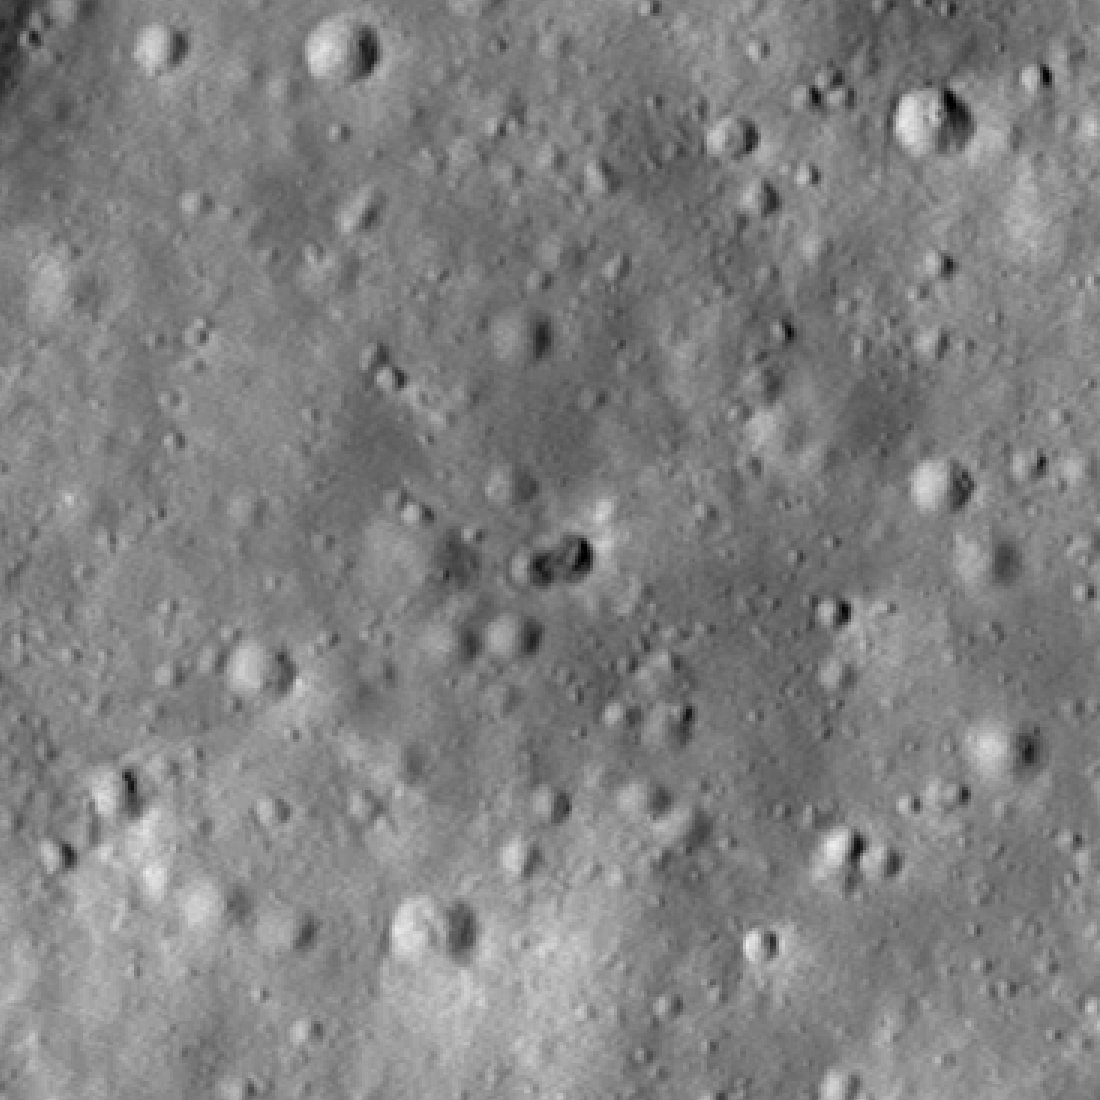 Gif of a rocky, grayscale lunar landscape, as seen from above by LRO. It switches between views of the landscape some time before and some time after an asteroid impact. A dark double crater appears near the center of the image.